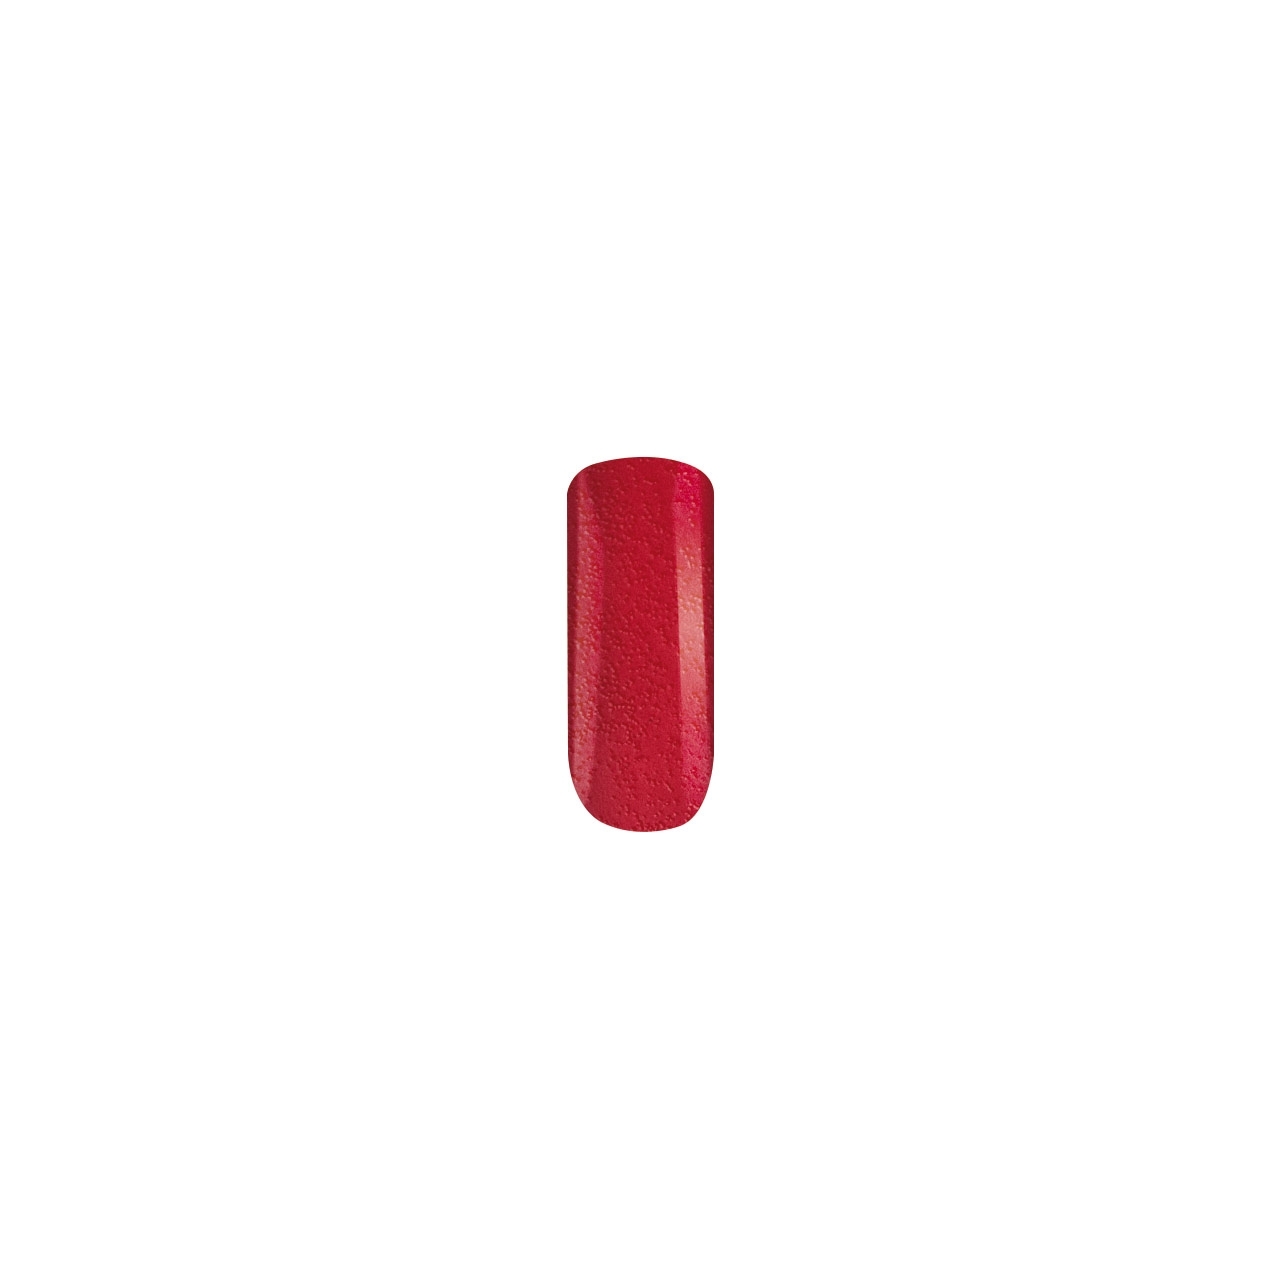 BAEHR BEAUTY CONCEPT - NAILS Nagellack sand fancy red 11 ml